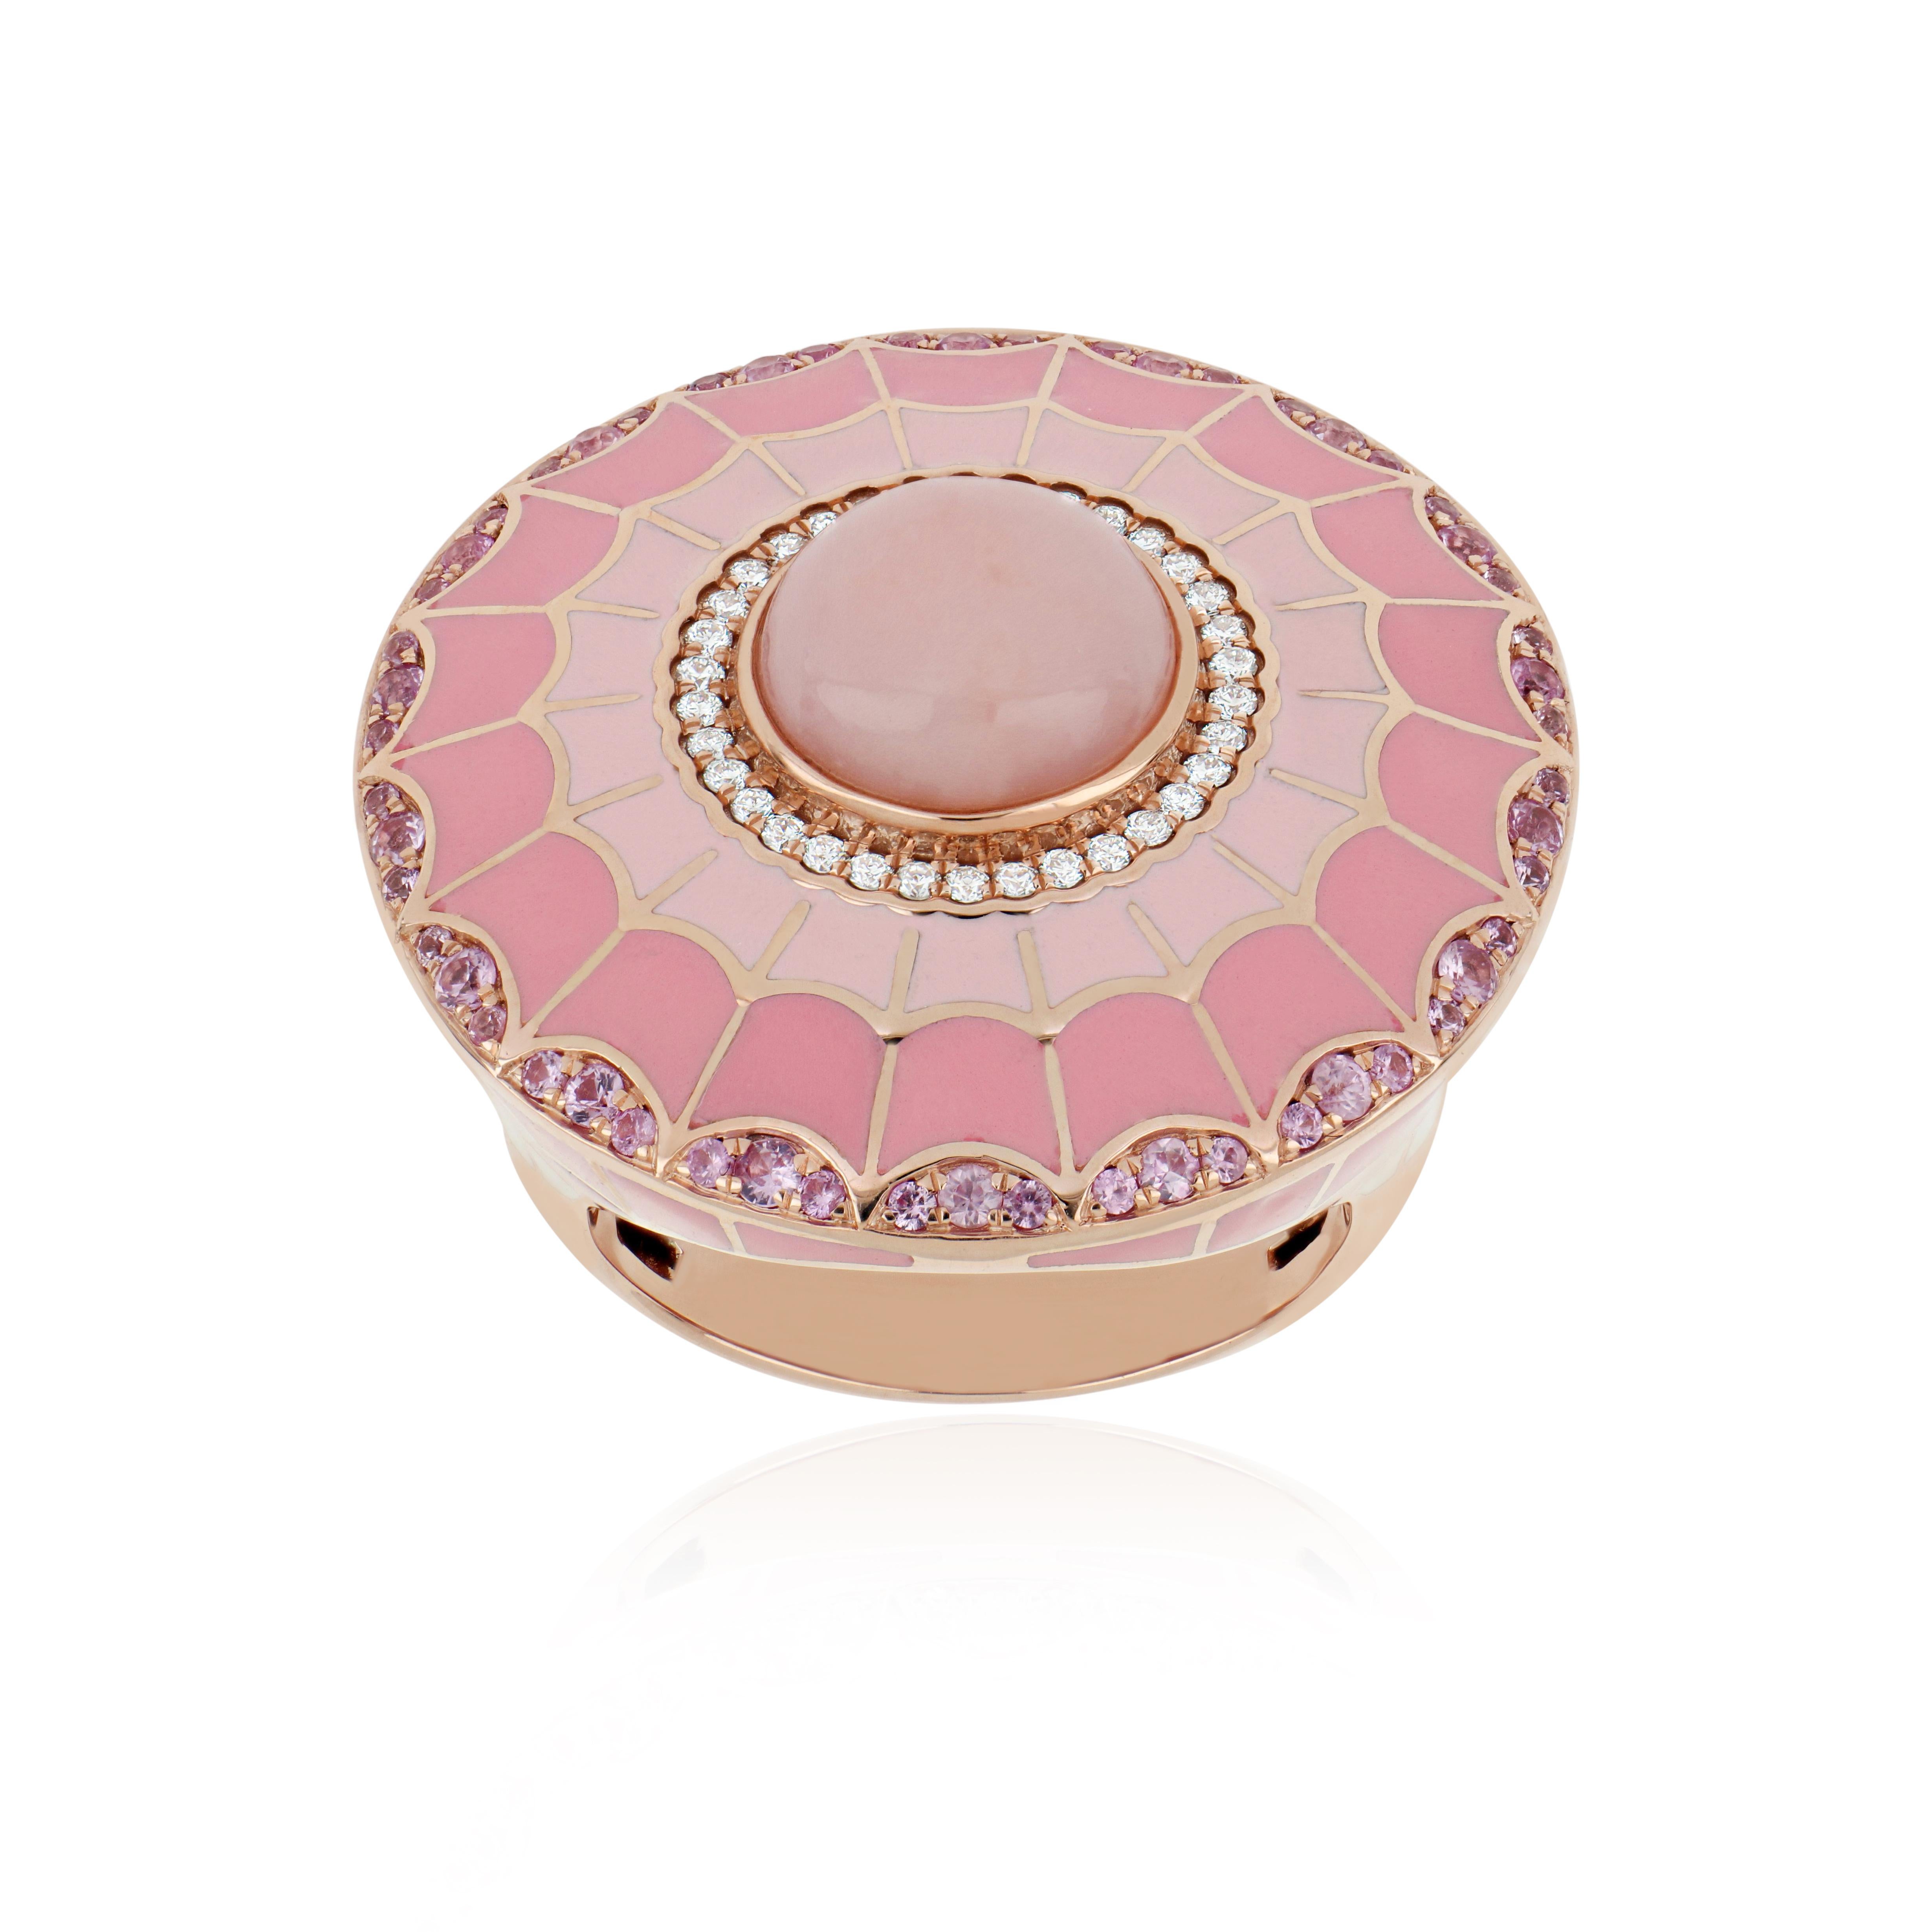 Elegant and Exquisitely detailed 14 karat Roes Gold Ring, with 3.10Cts (approx.) Round Shape Pink Opal set in centre and Surrounded by Enamel, and Micro pave Diamonds, weighing approx. 0.19 CT's. (approx.) total carat weight and contrasting pink